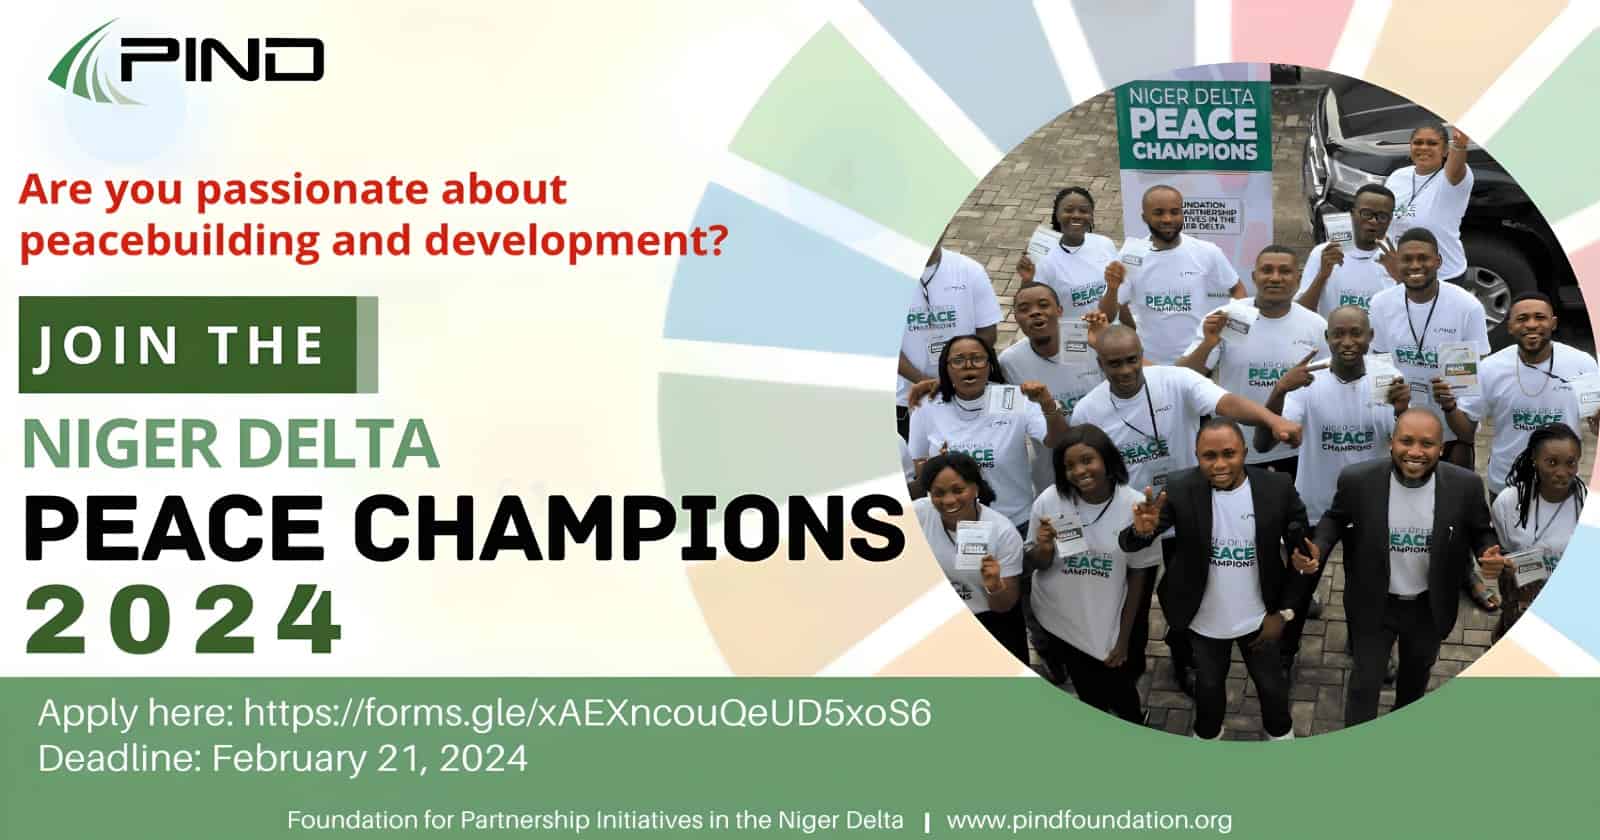  Niger Delta Peace Champions Program by PIND 